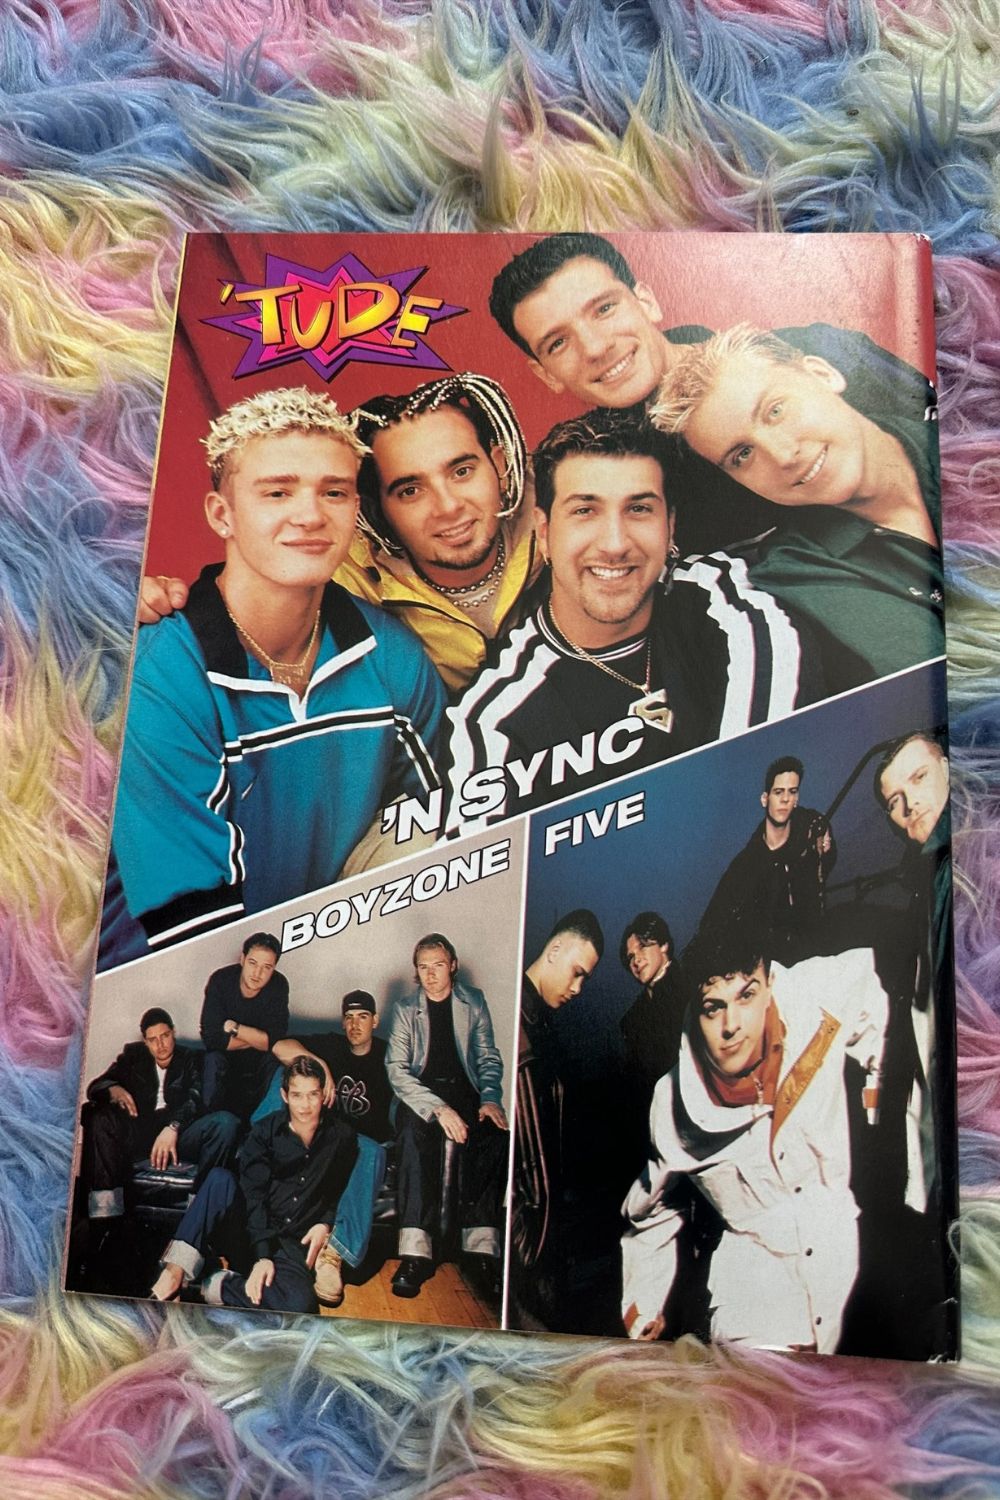 TUDE: 'N SYNC AND ALL YOUR FAVORITE MUSIC STARS MAGAZINE*